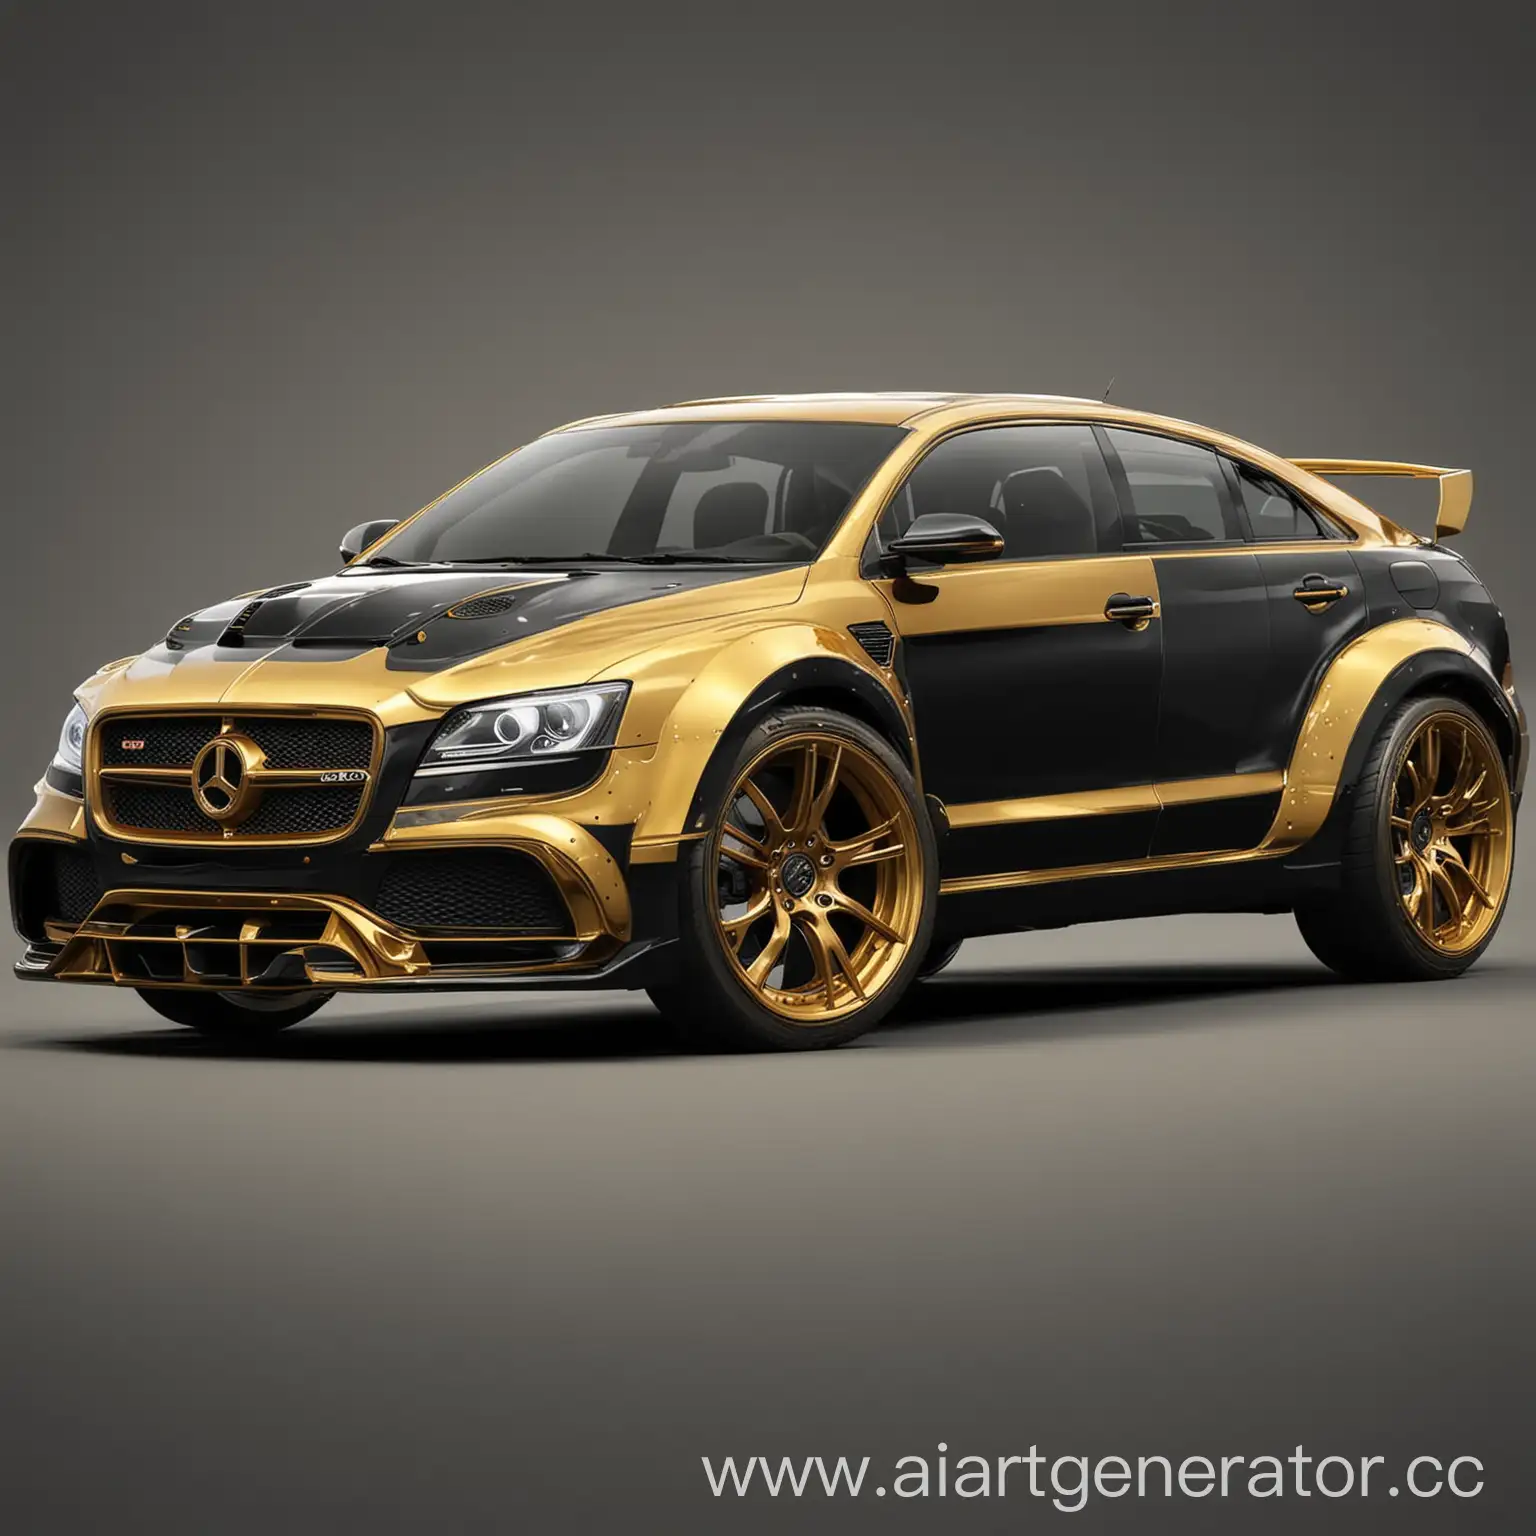 Luxurious-Golden-and-Black-Wheeled-Car-in-Realistic-Style